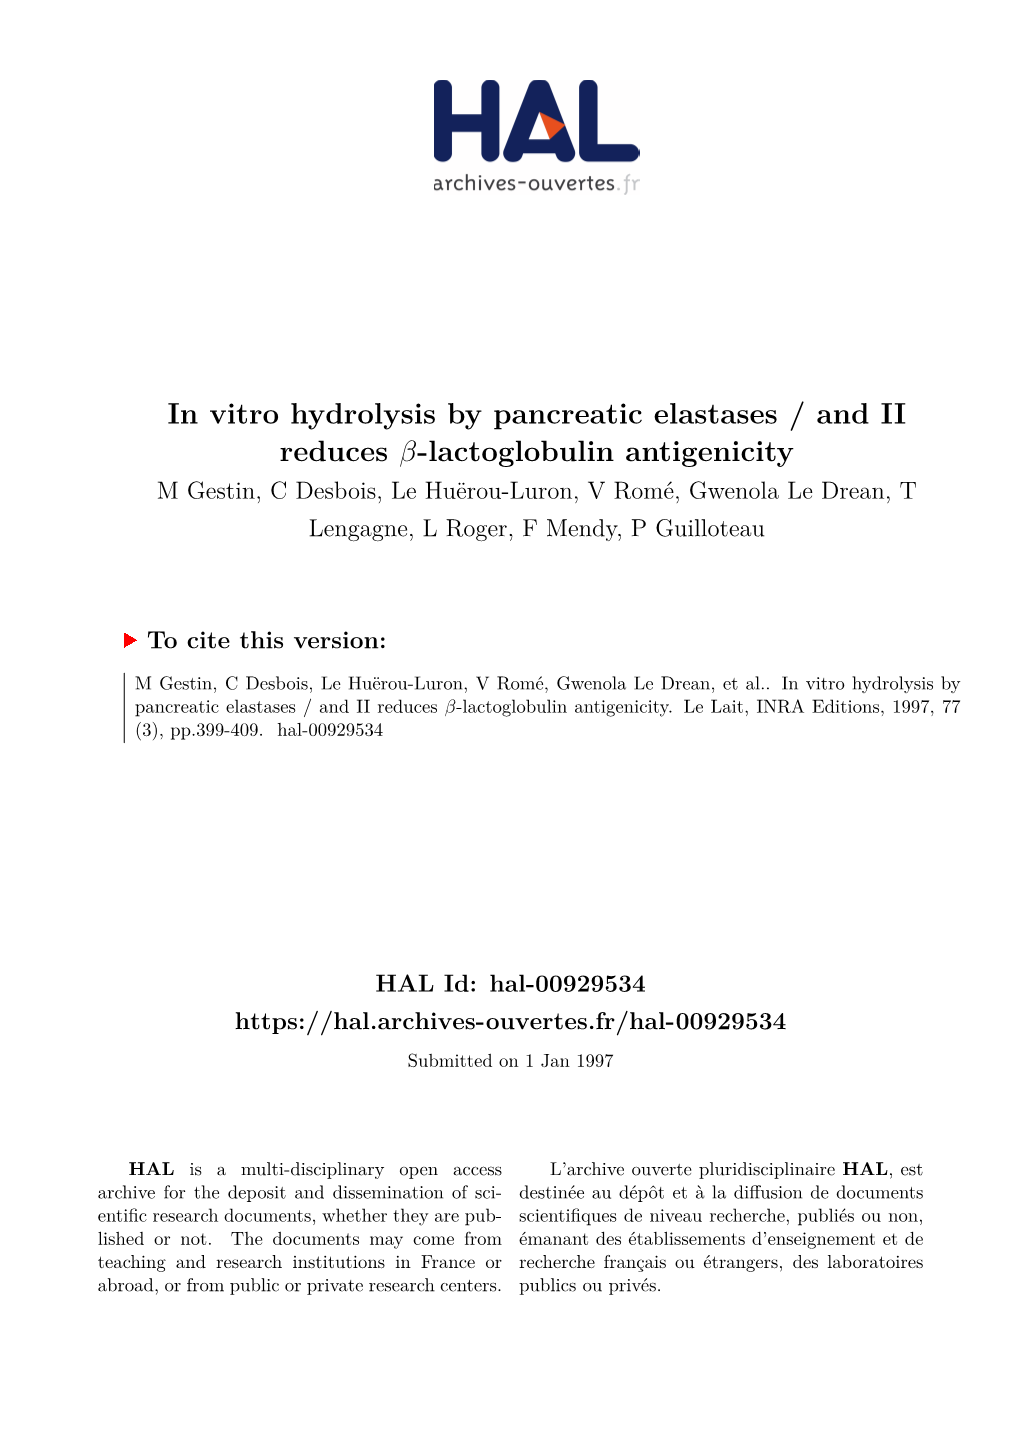 In Vitro Hydrolysis by Pancreatic Elastases / and II Reduces